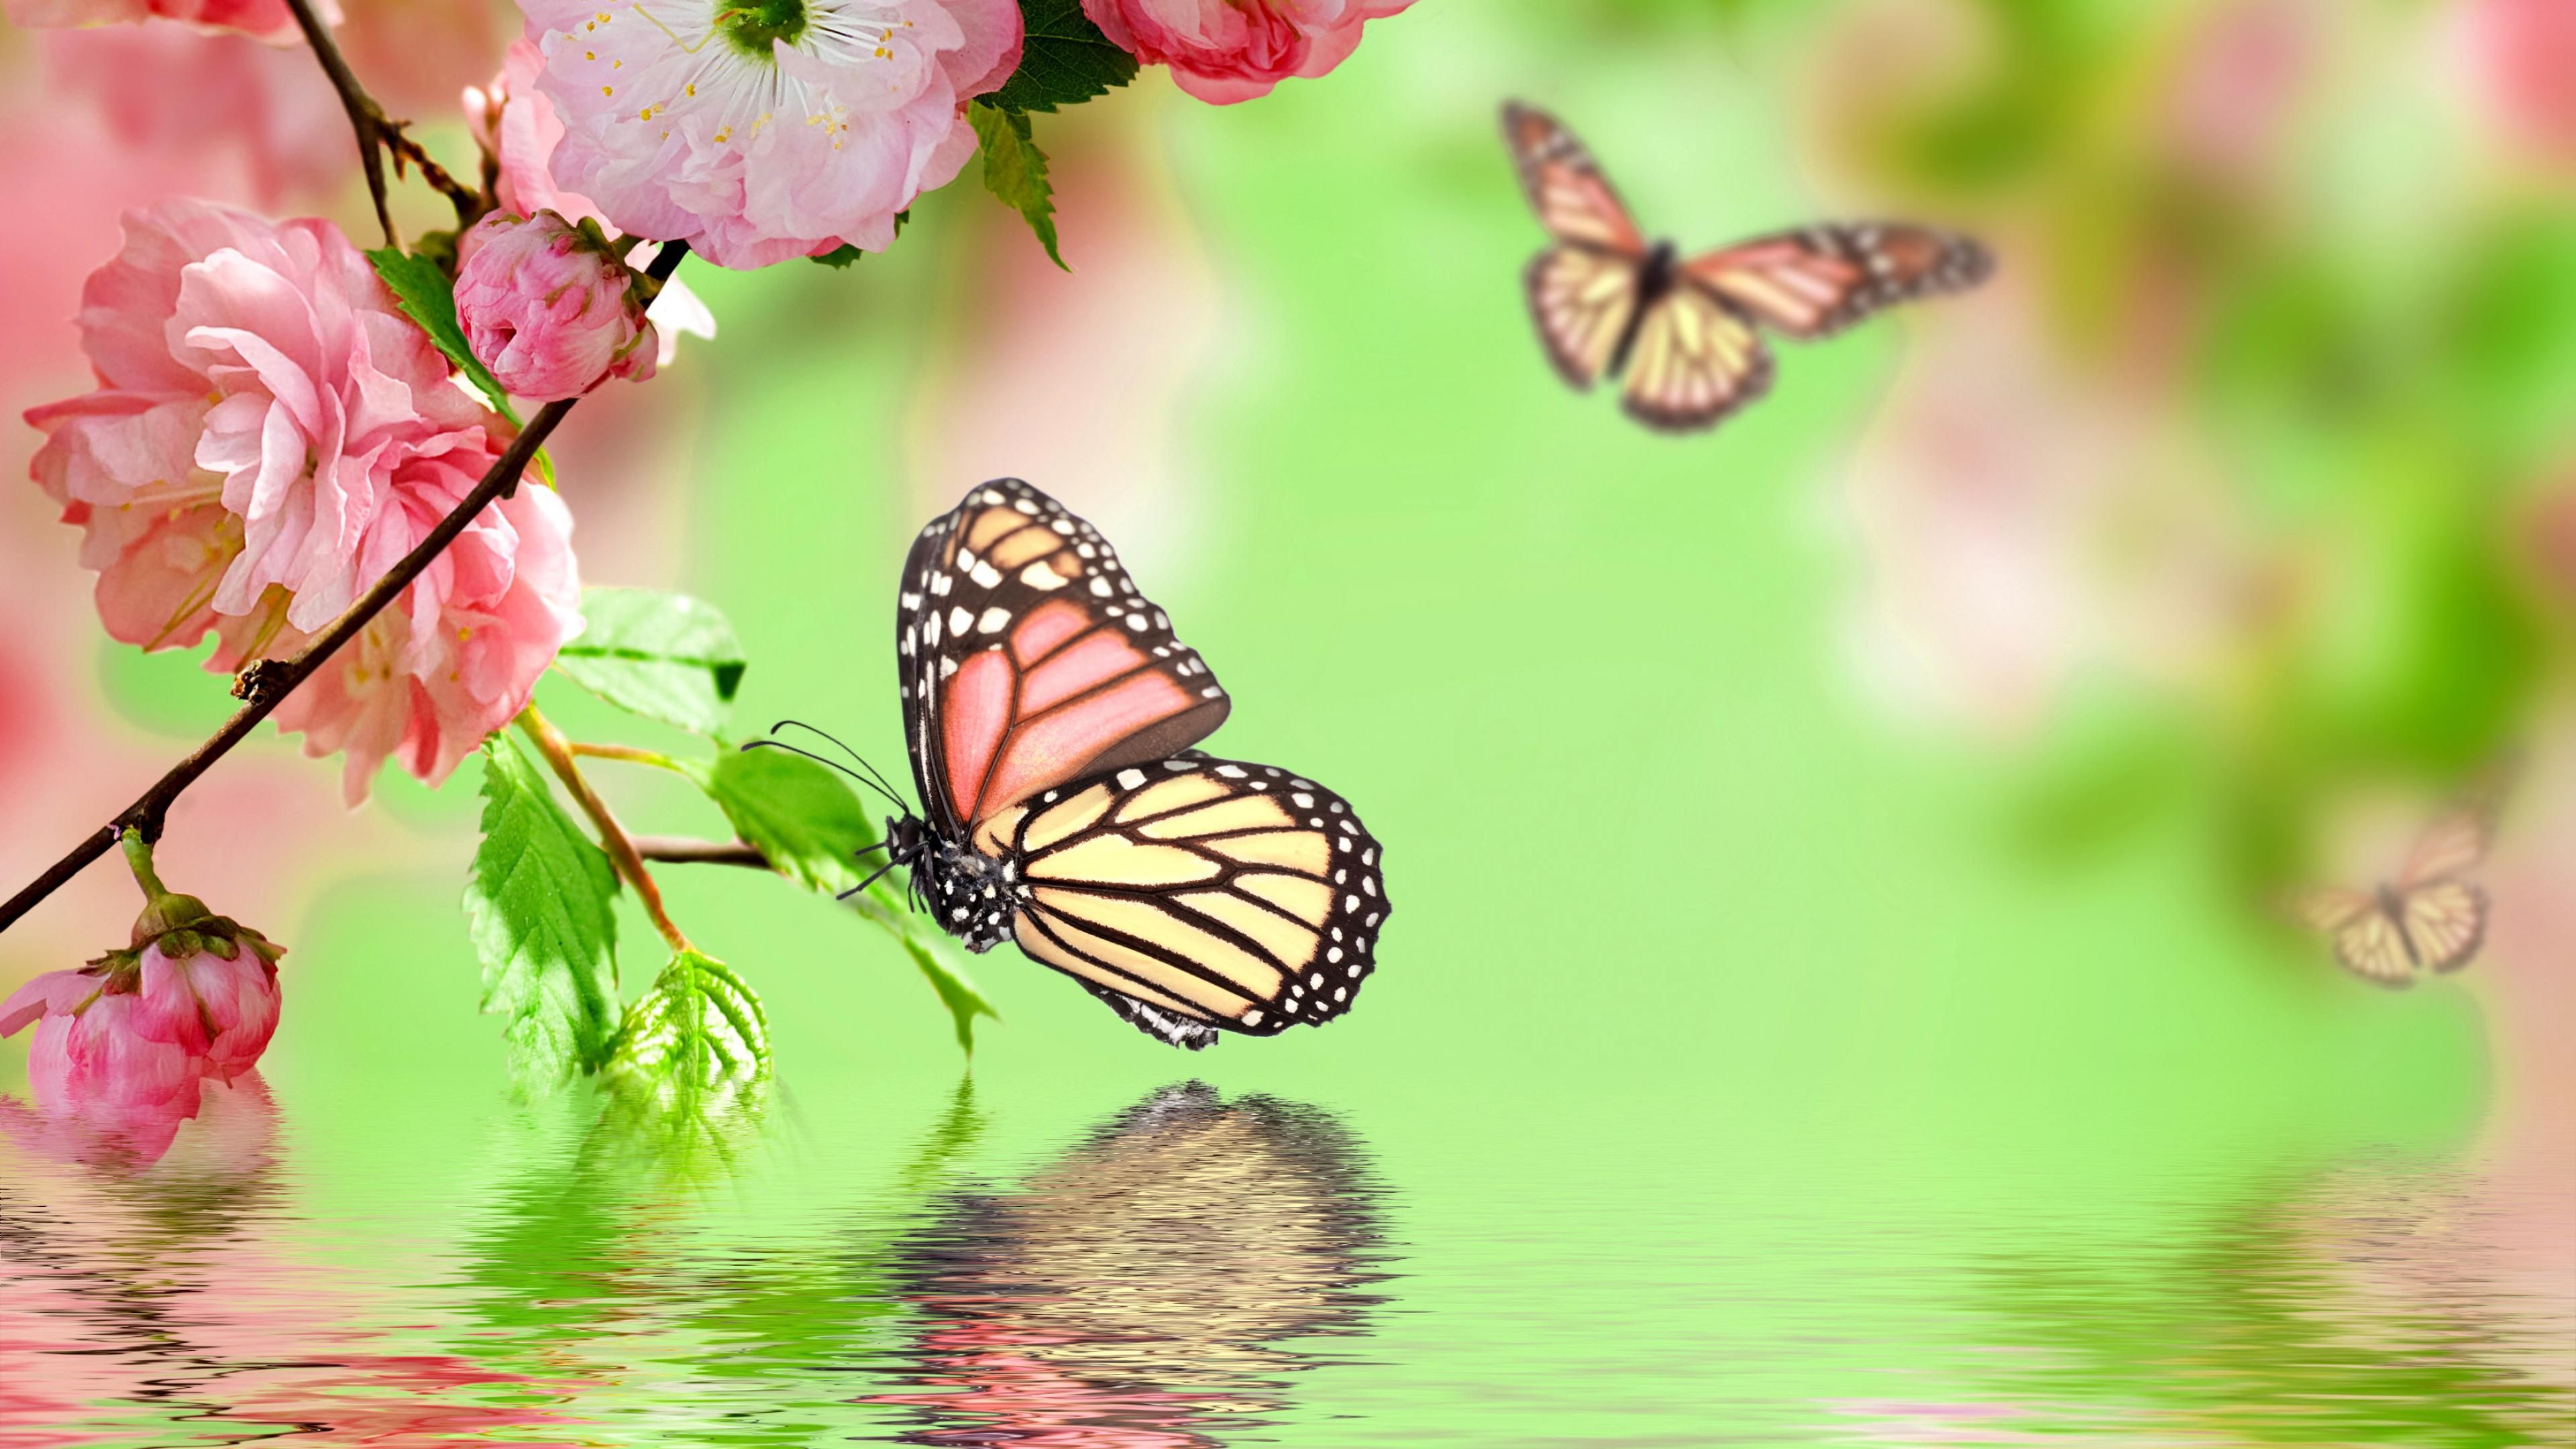 Selection of the most beautiful butterfly wallpaper